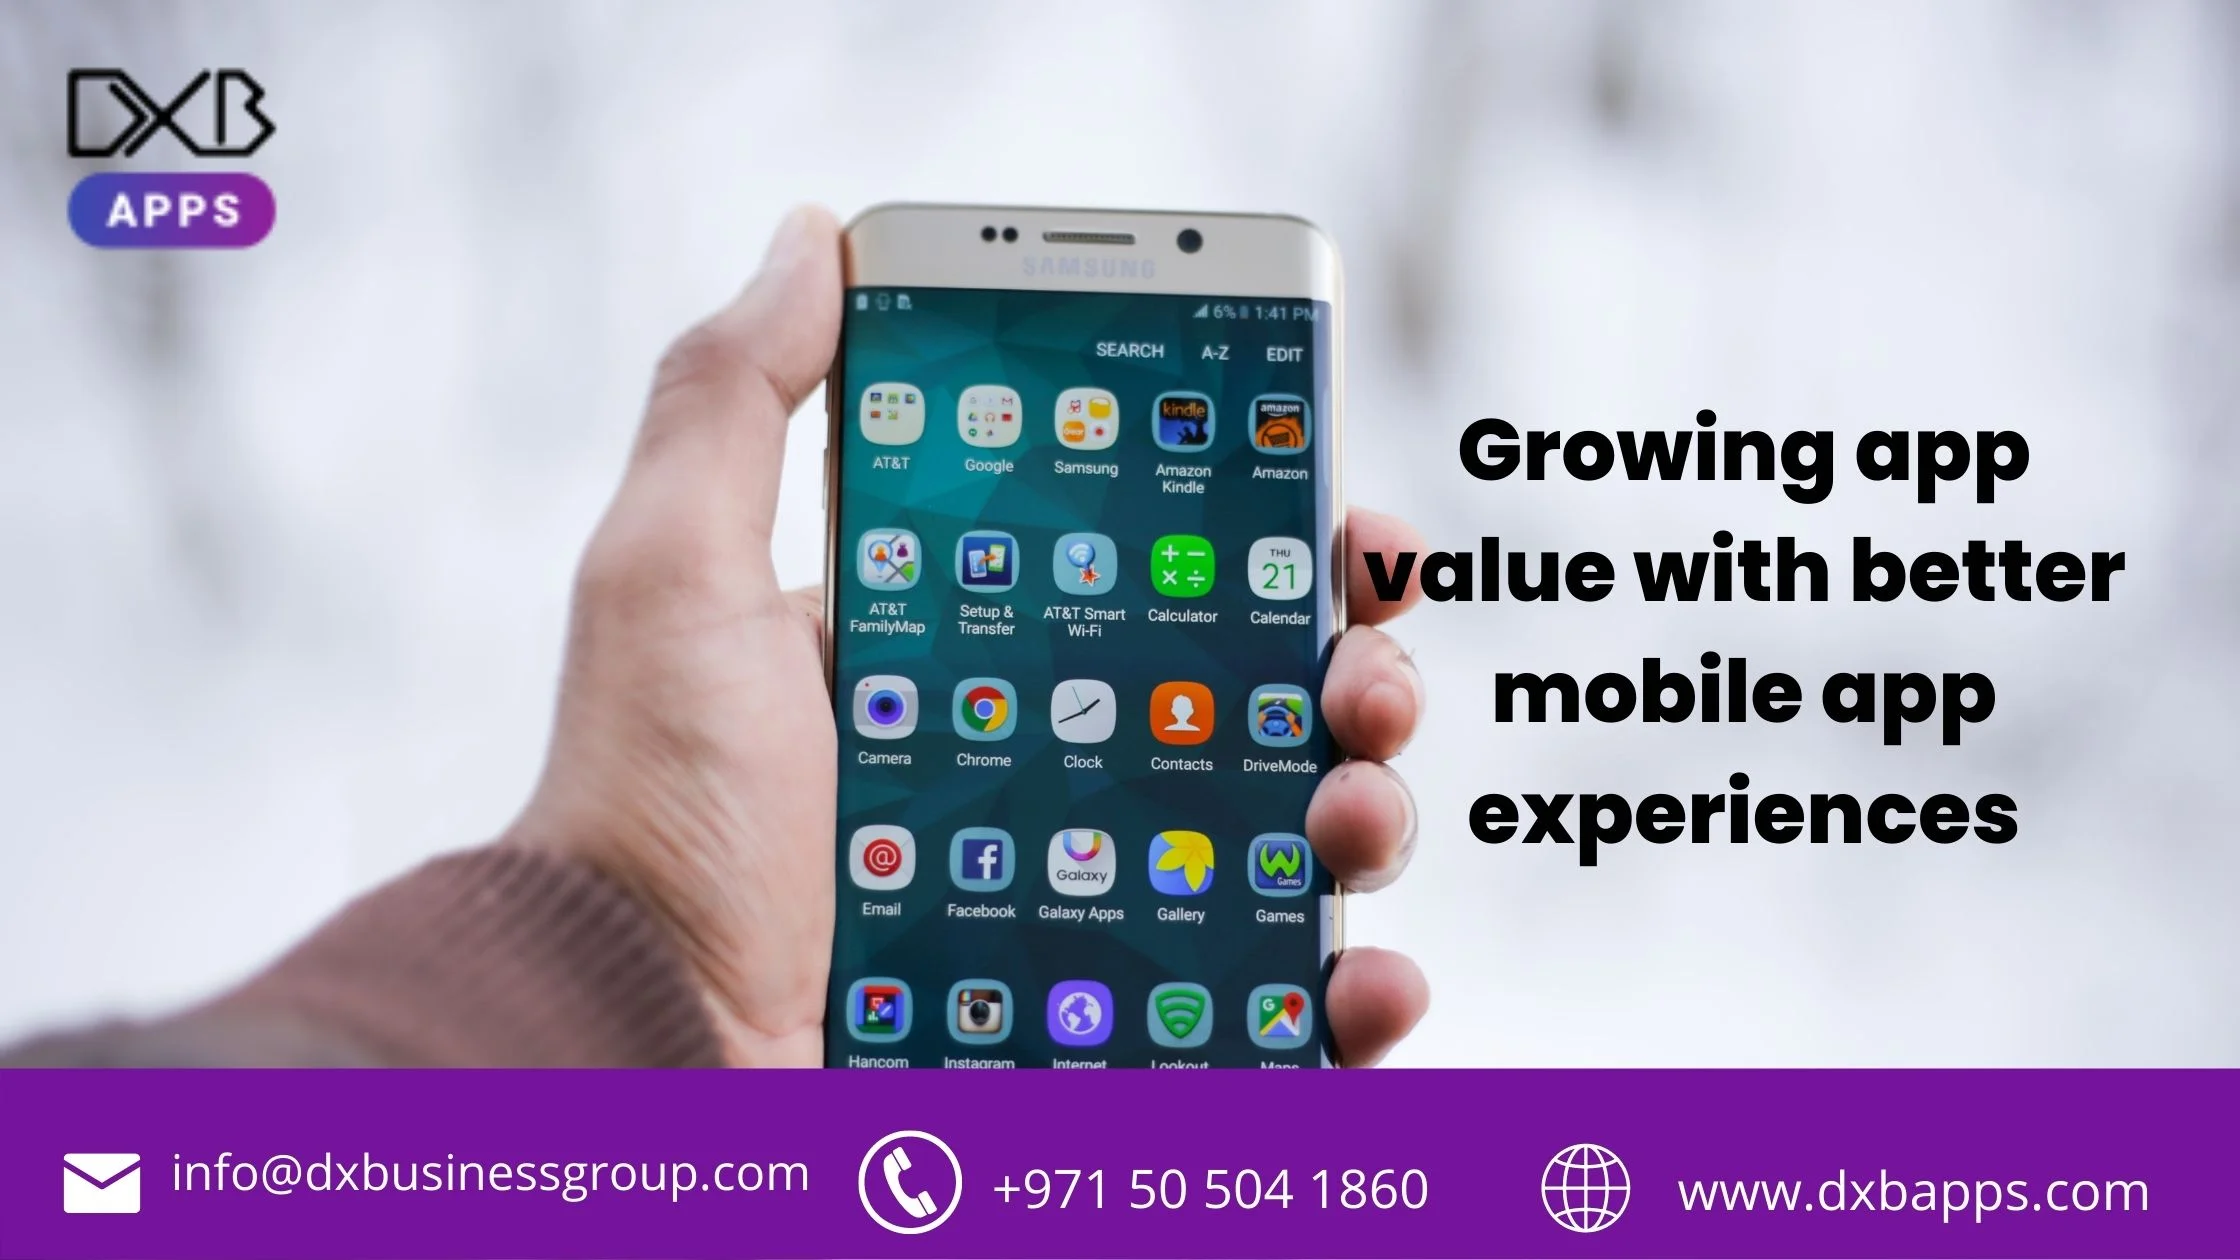 Growing app value with better mobile app experiences